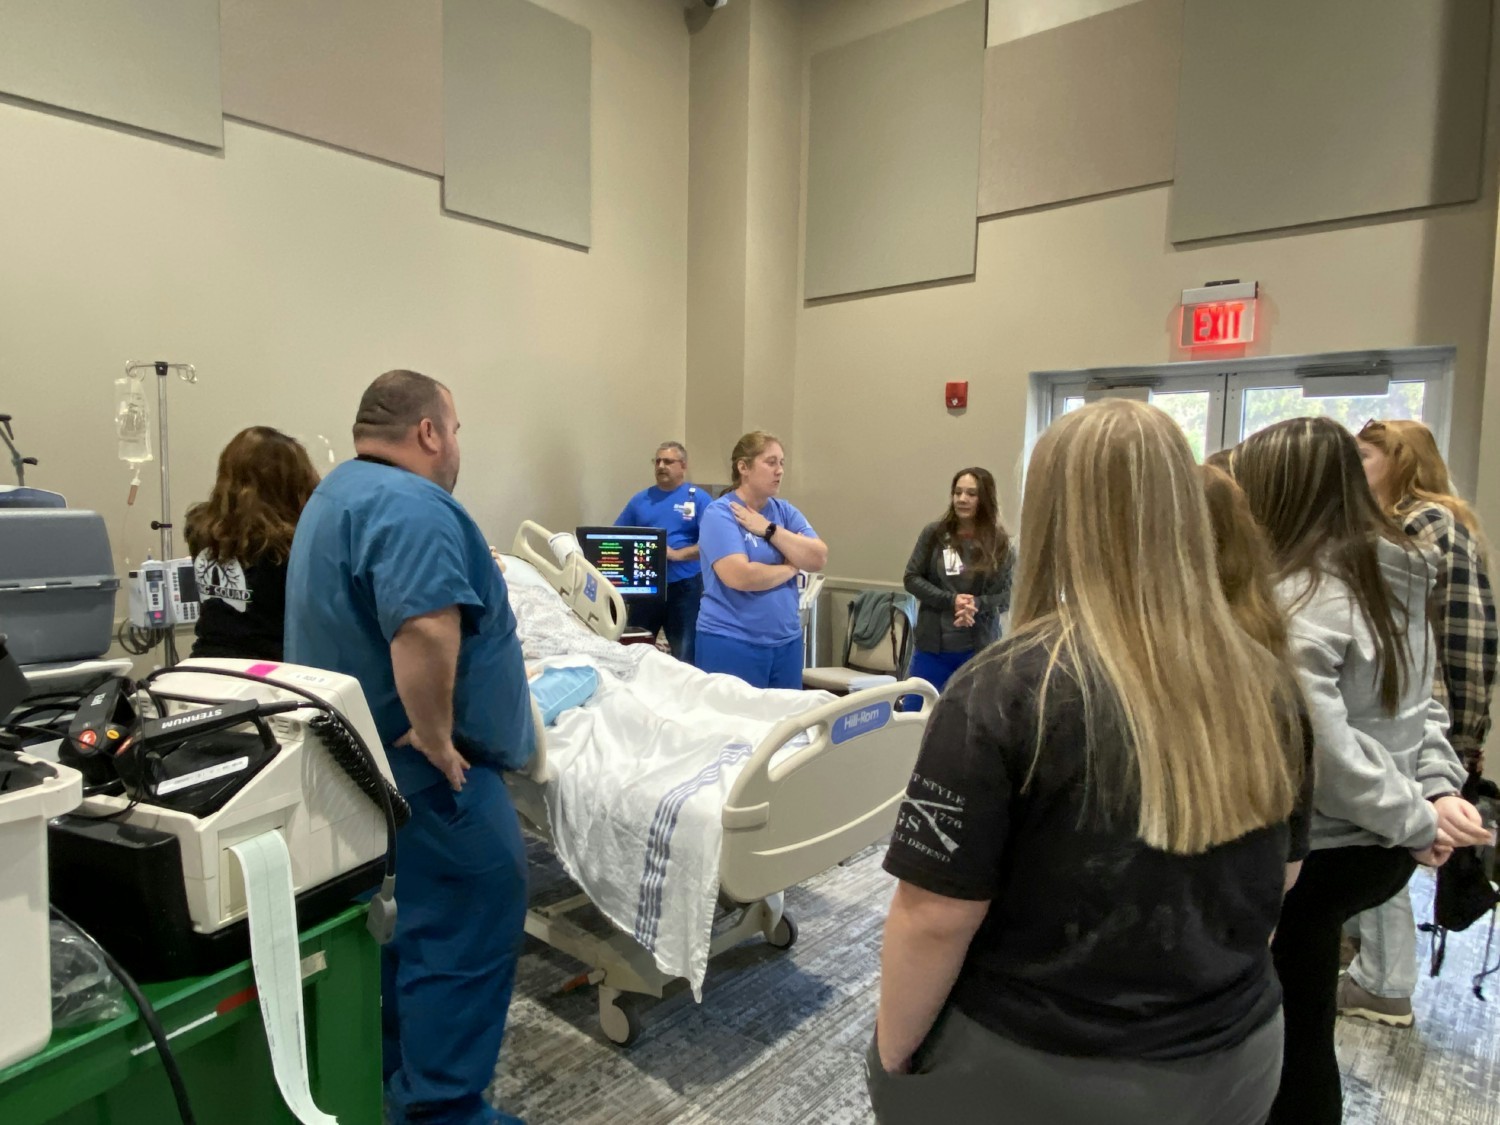 Healthcare camp put on by our employees for local high school students to showcase opportunities in healthcare.